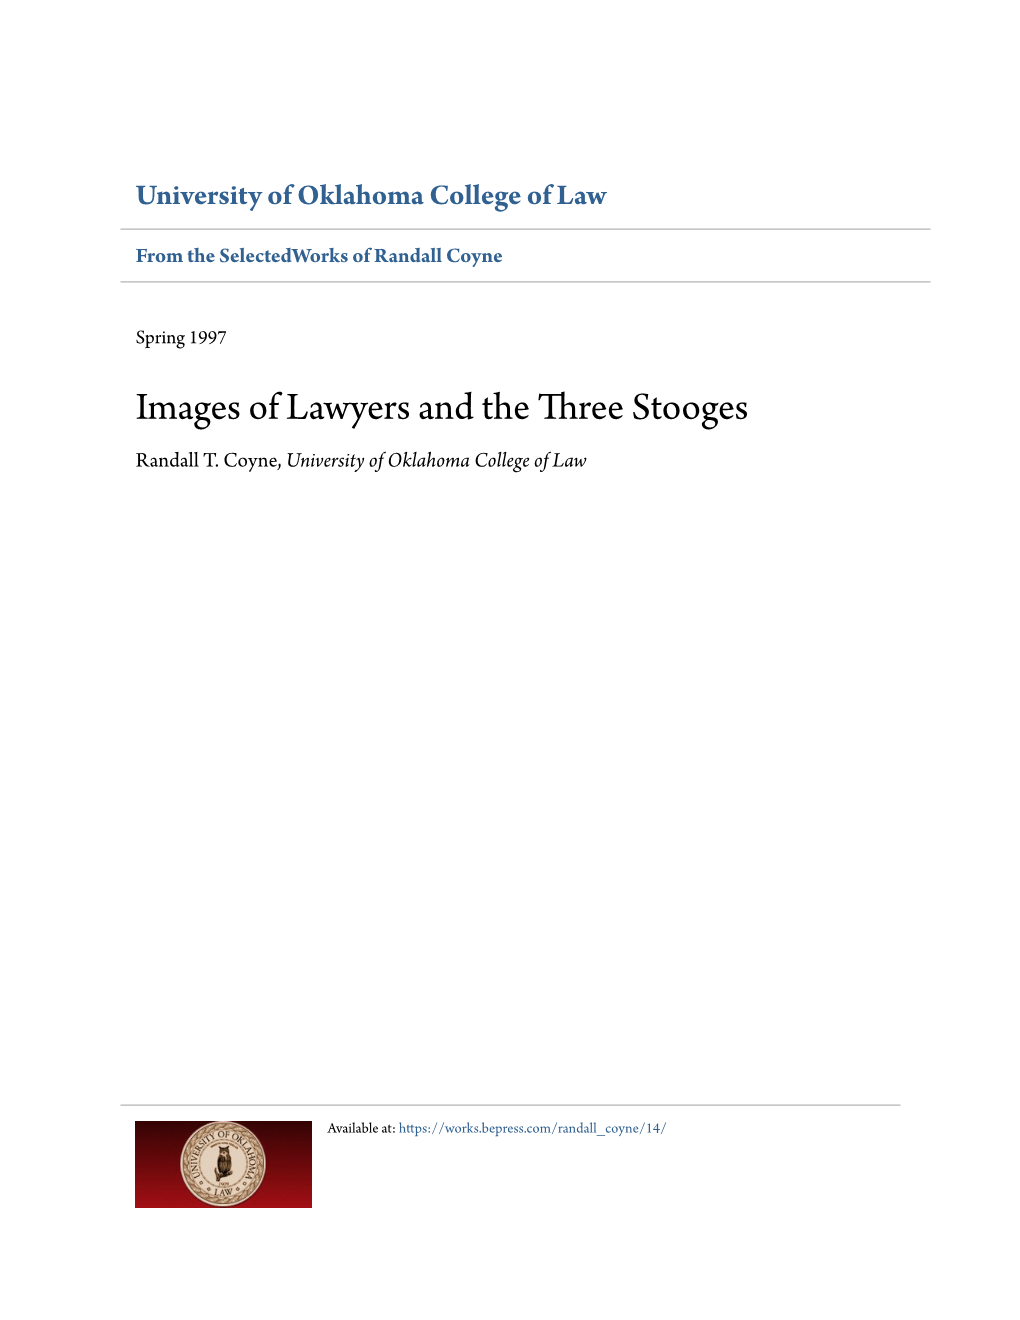 Images of Lawyers and the Three Stooges Randall T